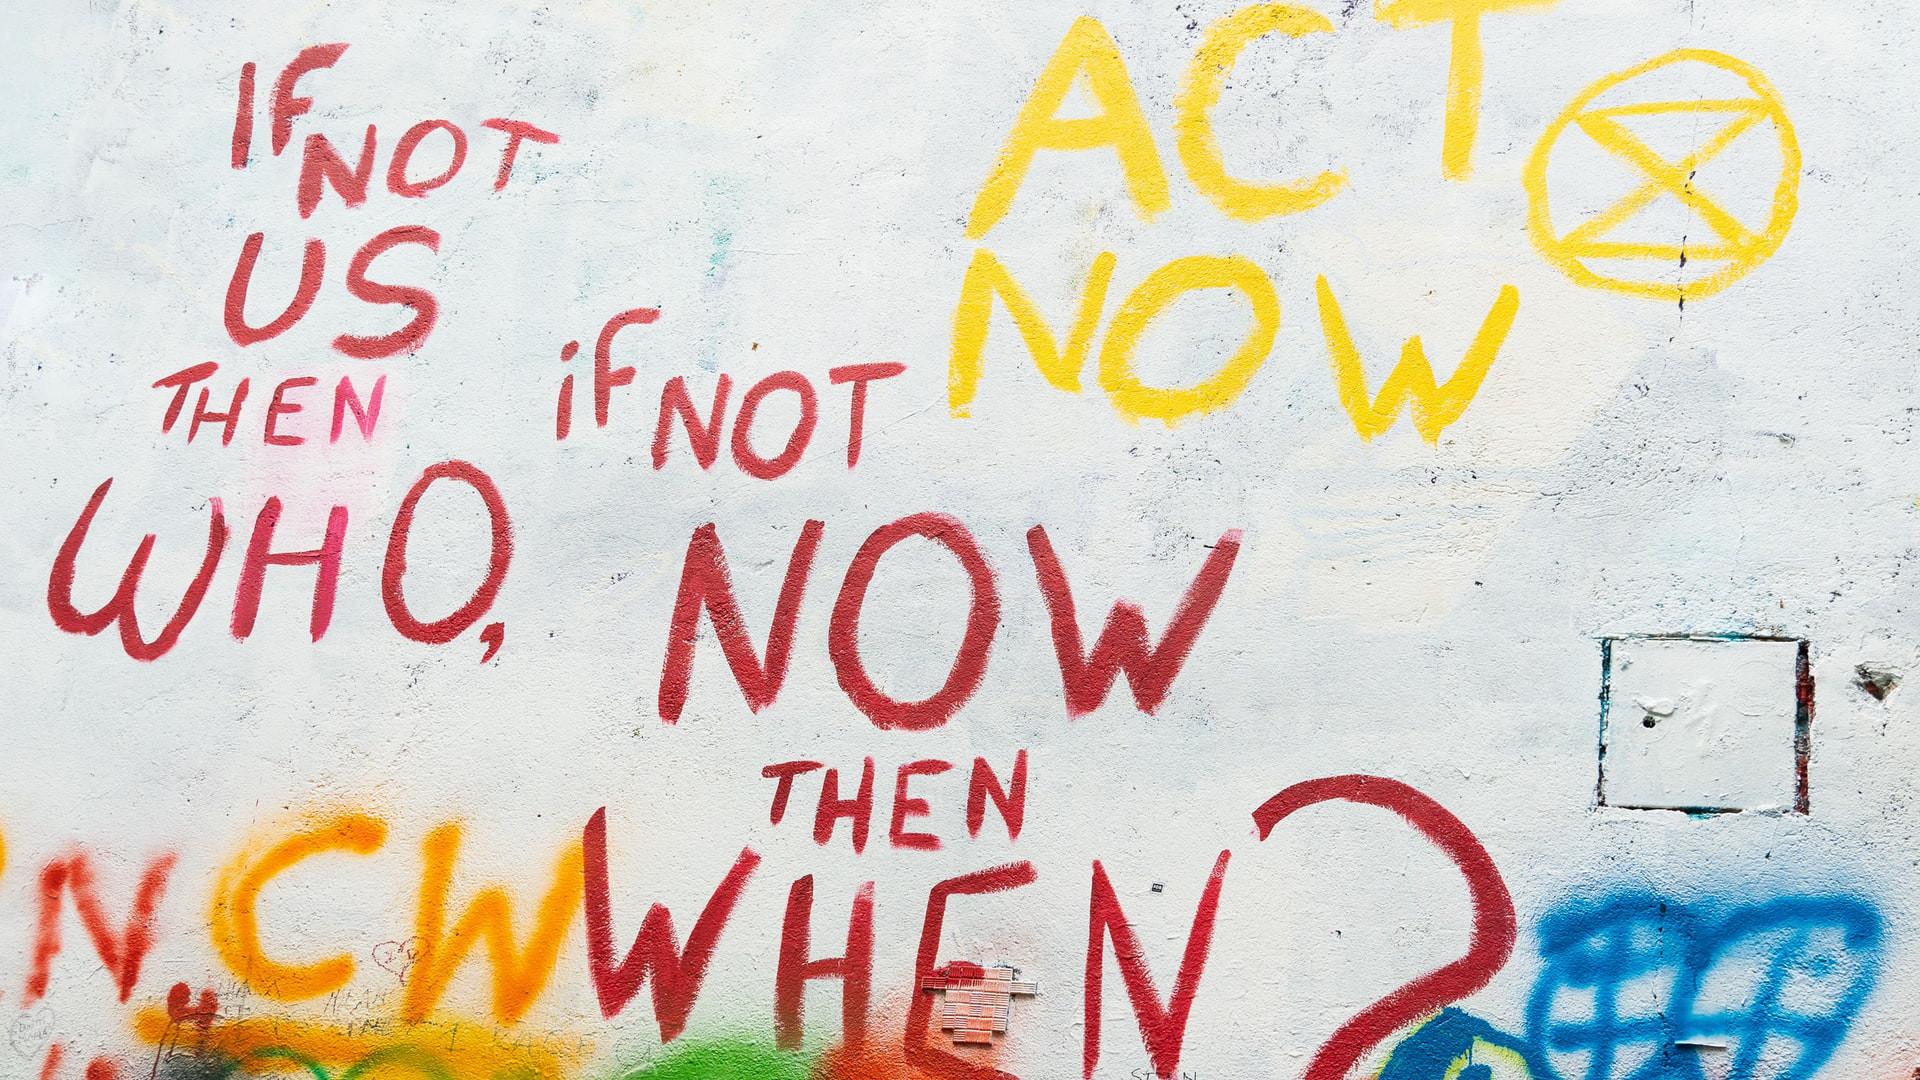 Graffito an weißer Wand: If not us then who, if not now then when?